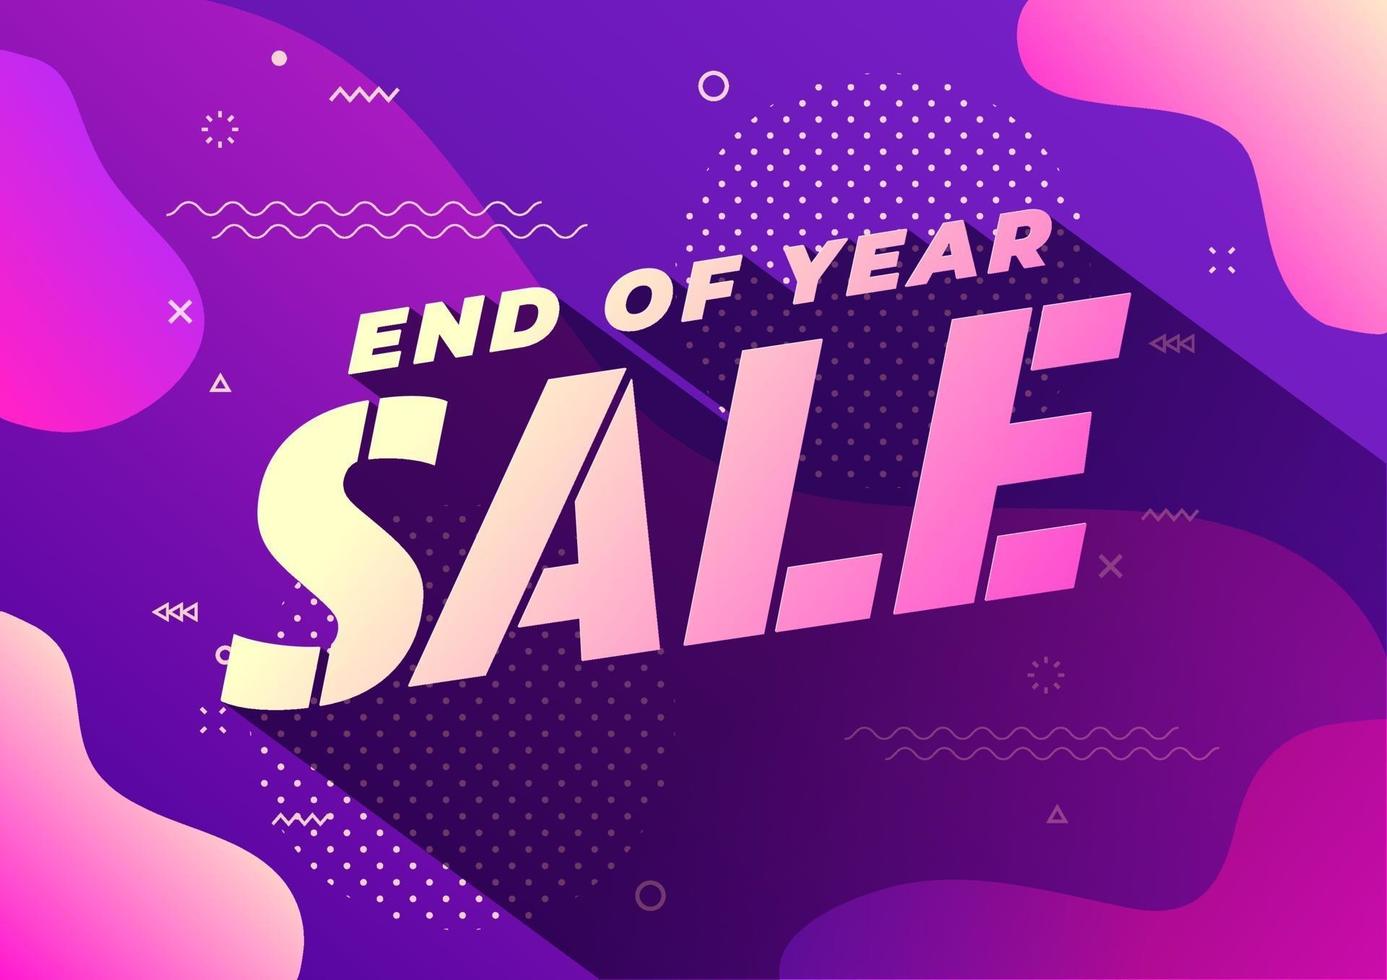 End of year sale banner. Sale banner template design. vector